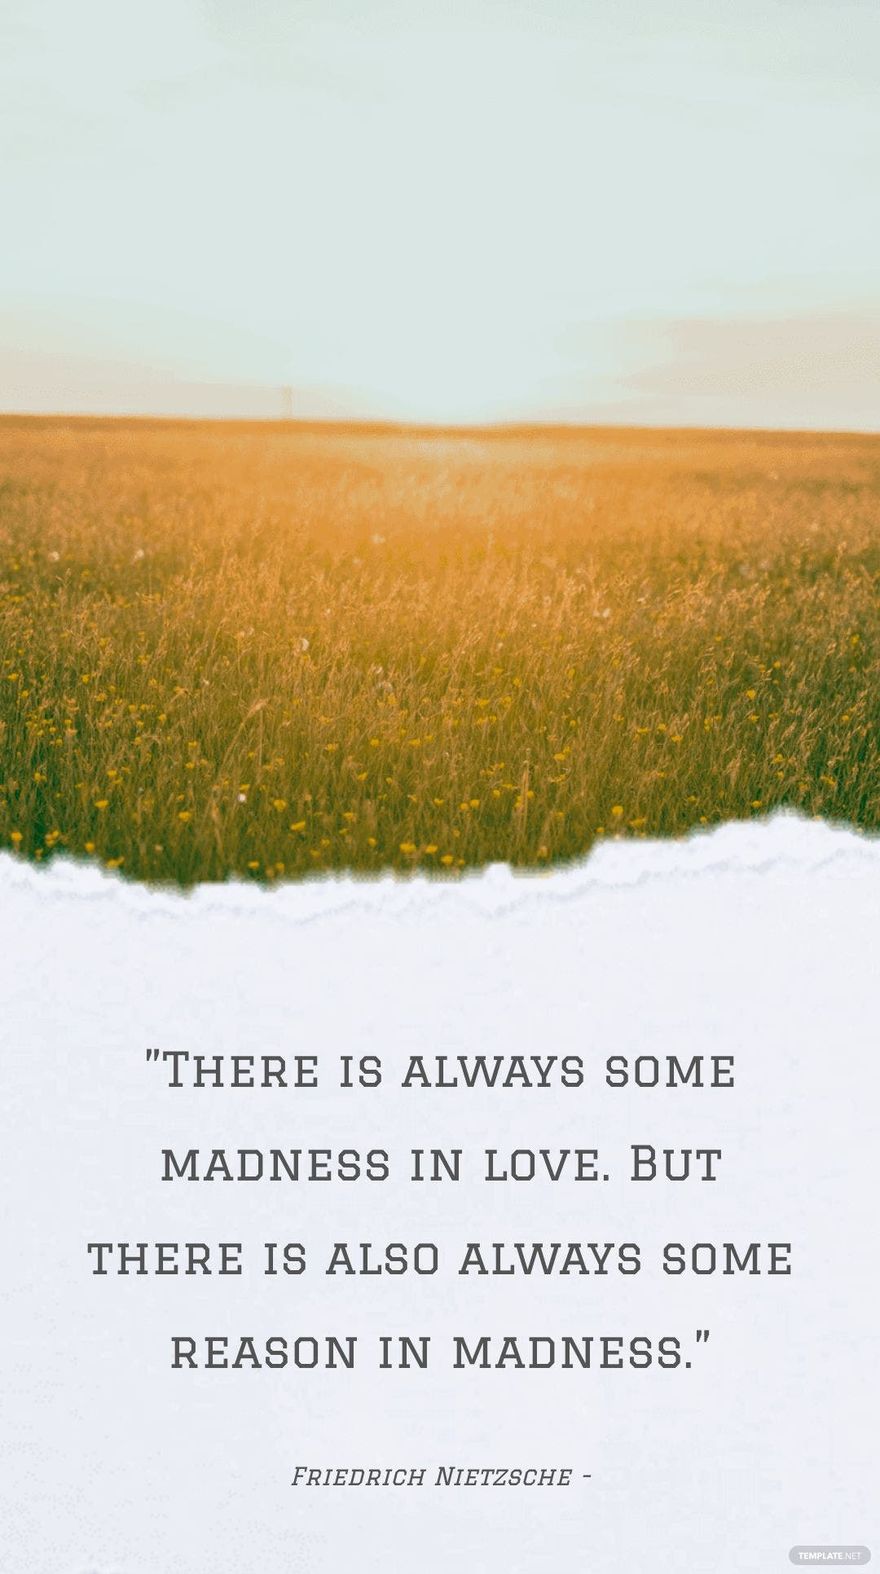 Friedrich Nietzsche - ”There is always some madness in love. But there is also always some reason in madness.”